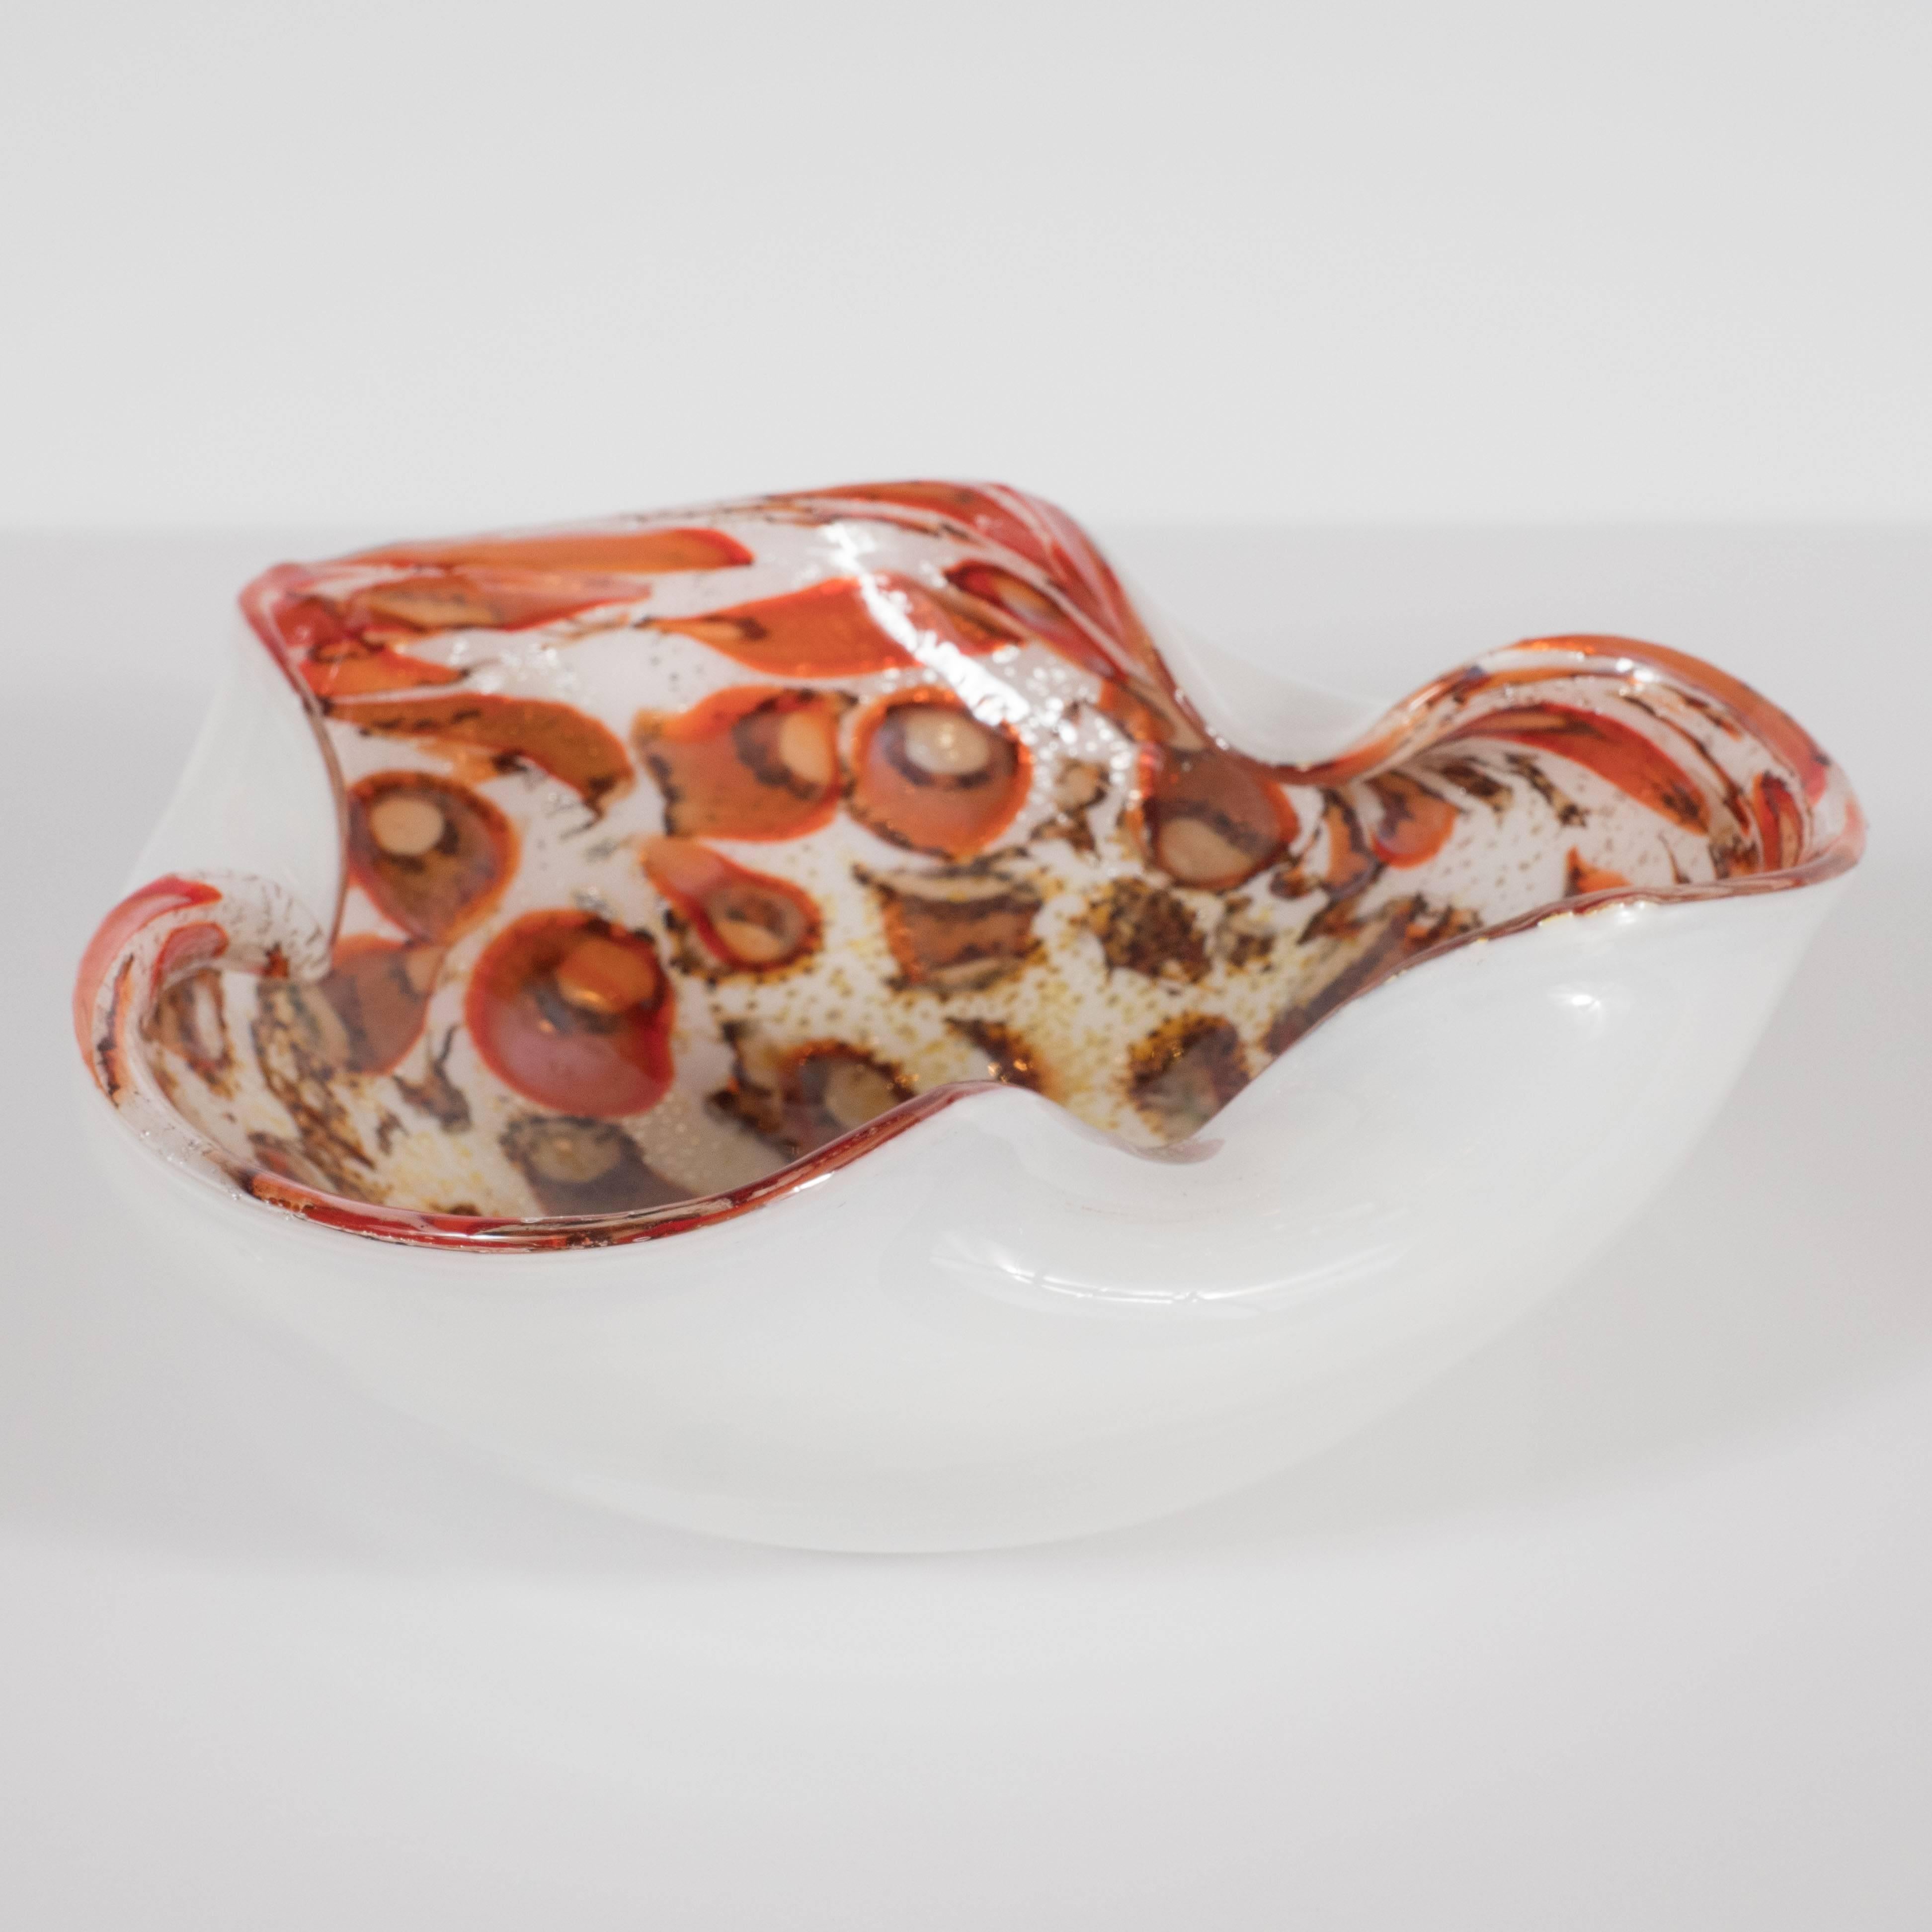 This dynamic Mid-Century Modern bowl was hand blown on the fabled island of Murano, Italy, off the coast of Venice renowned for centuries for its superlative glass production. This piece features flowing and sinuous curves achieved by three gently